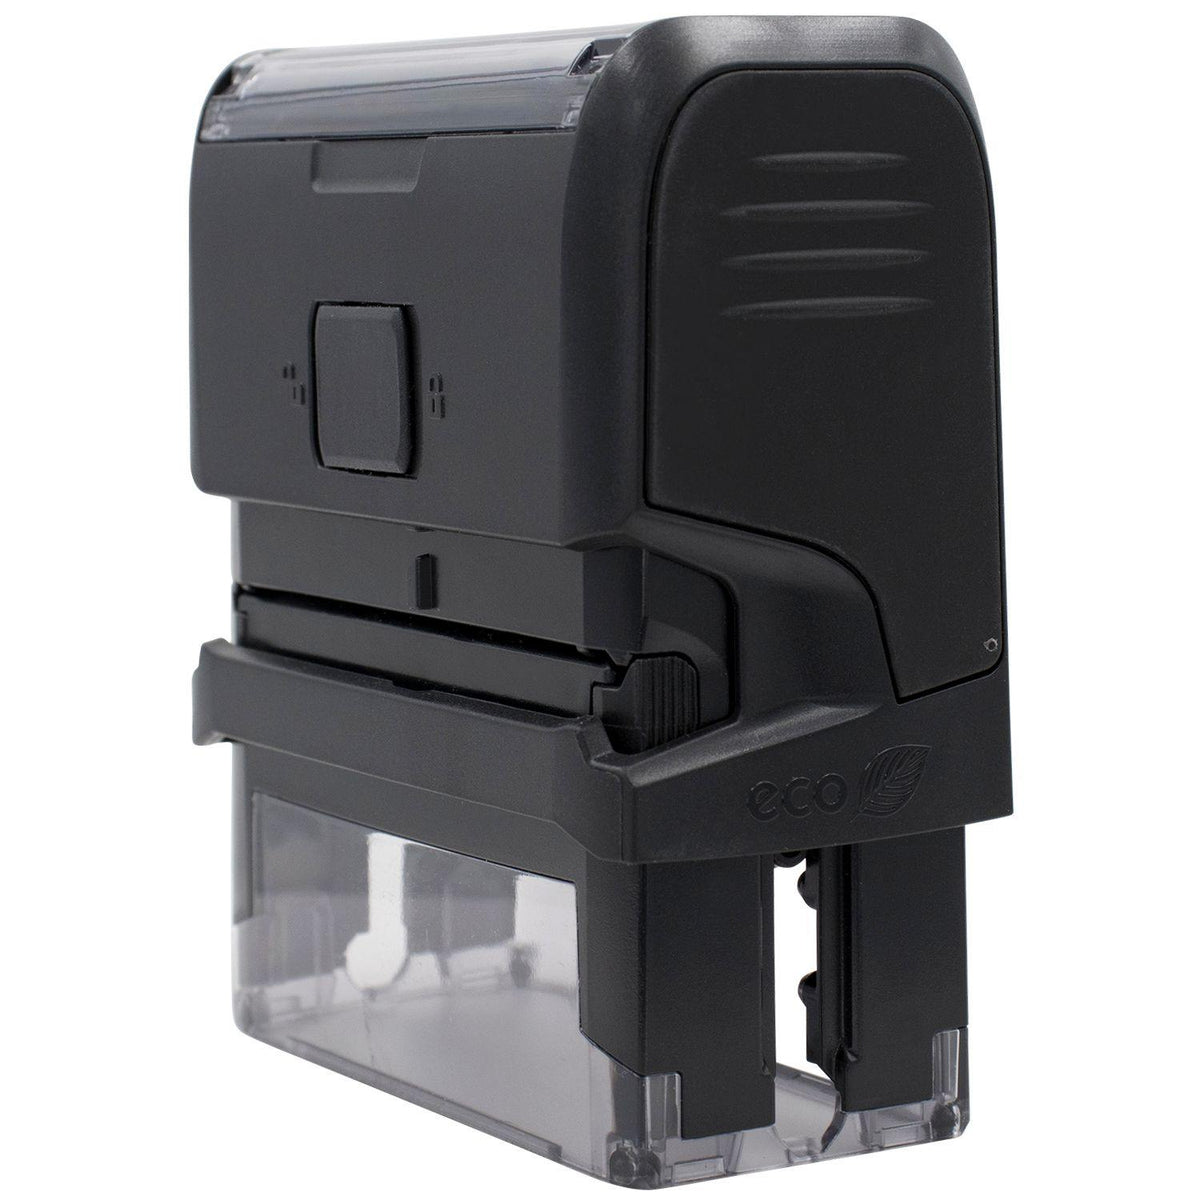 Self Inking Blue Ribbon Stamp - Engineer Seal Stamps - Brand_Trodat, Impression Size_Small, Stamp Type_Self-Inking Stamp, Type of Use_Medical Office